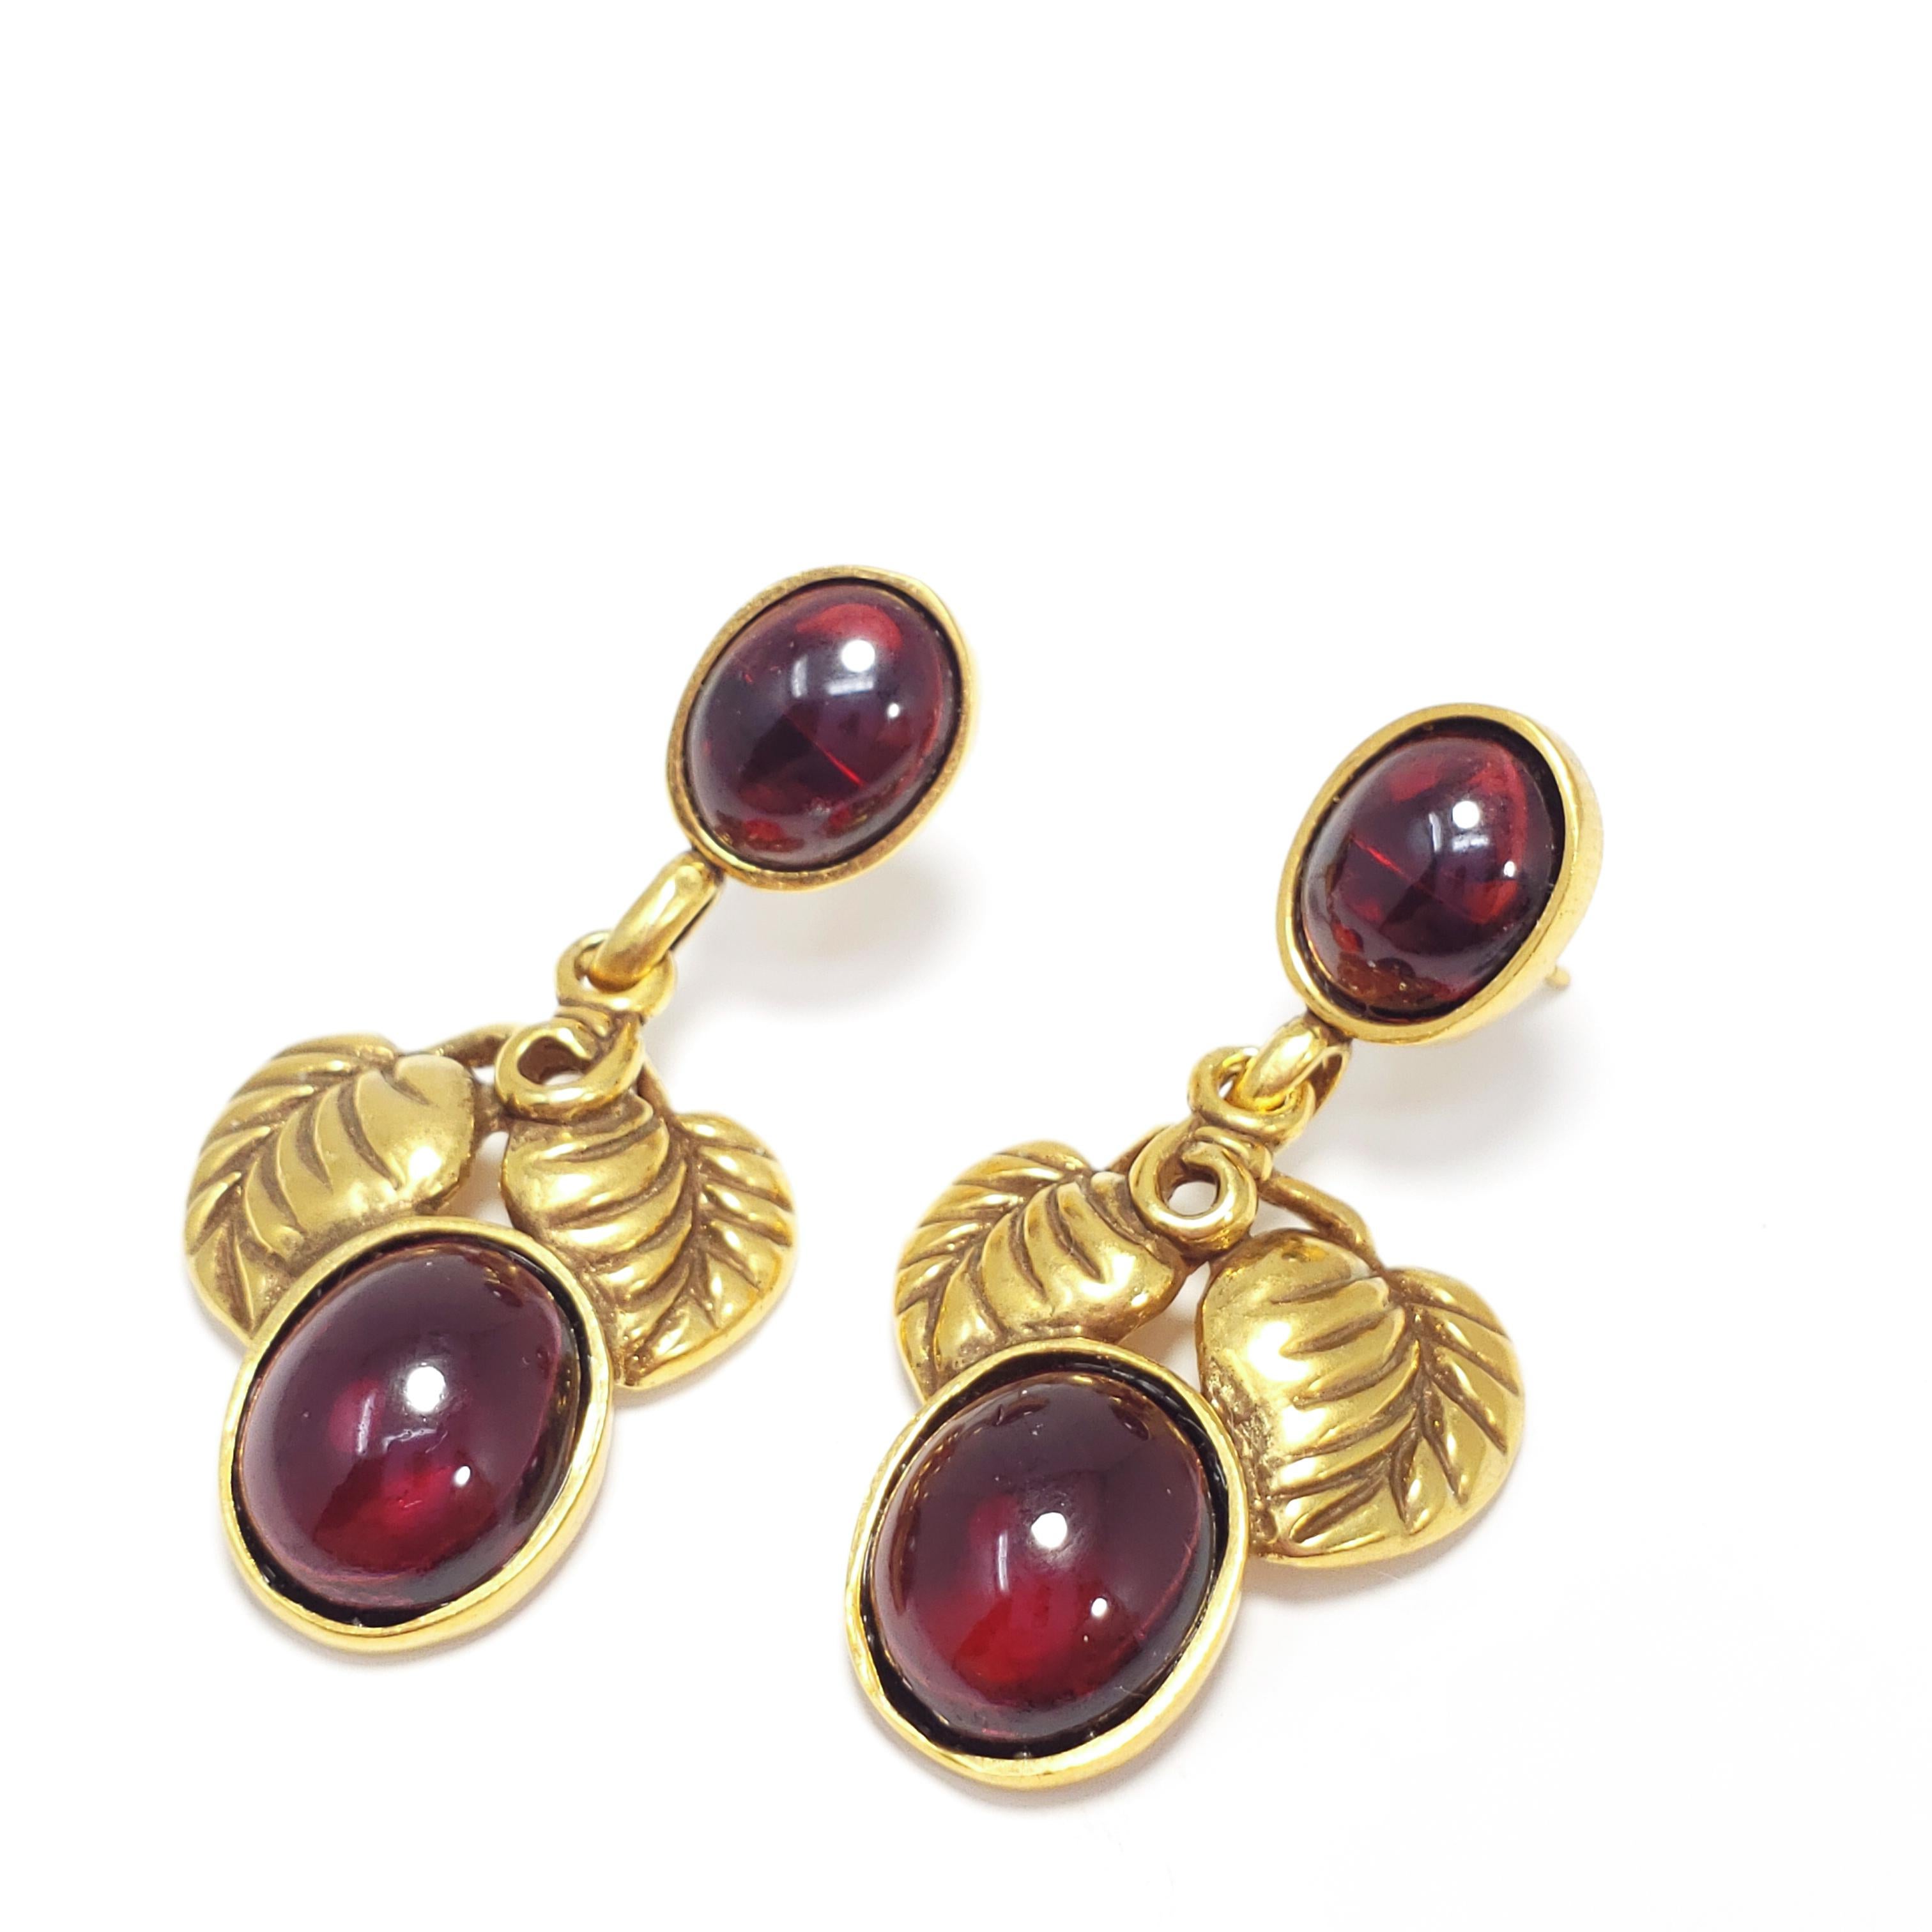 A pair of vermeil (sterling silver, gold plated) earrings, accented with open back garnet cabochons and floral leaf motifs. Post backs, circa mid 1900s.

Hallmarks: Sterling, MFA
